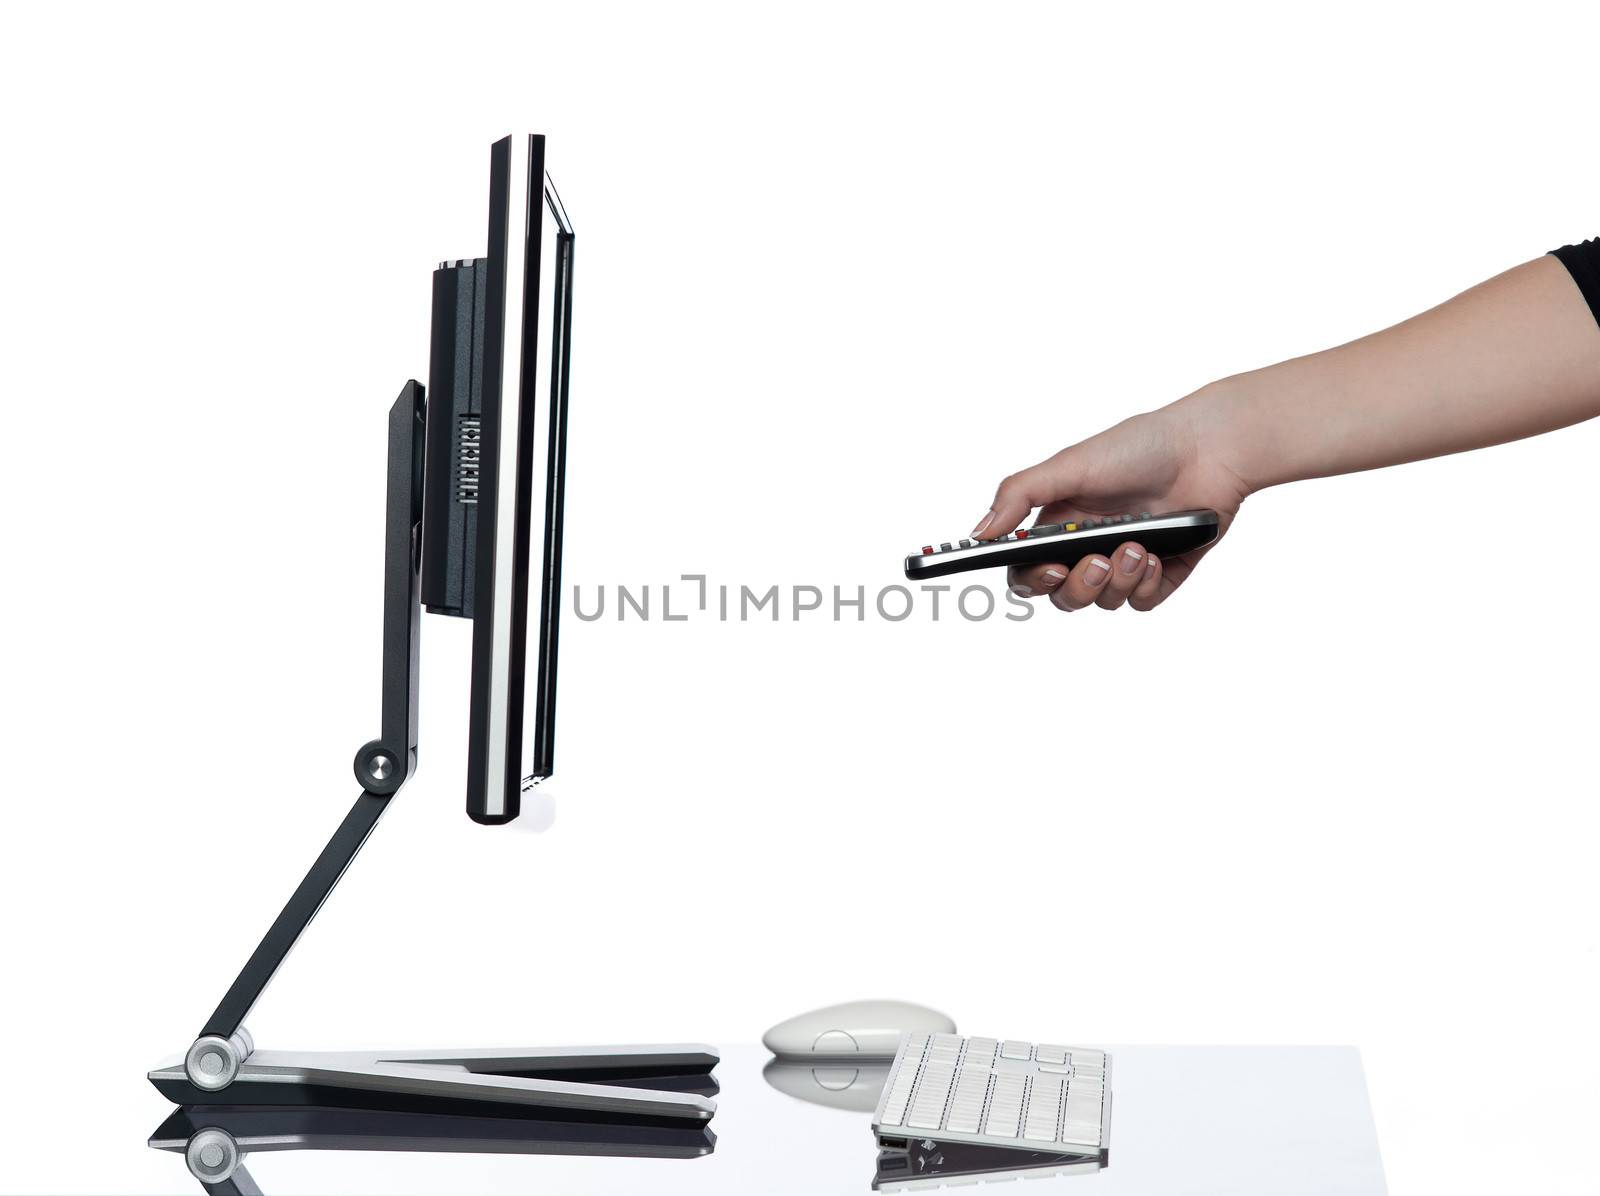 human hand pointing remote control and a computer display monitor on isolated white background expressing switch off pause concept